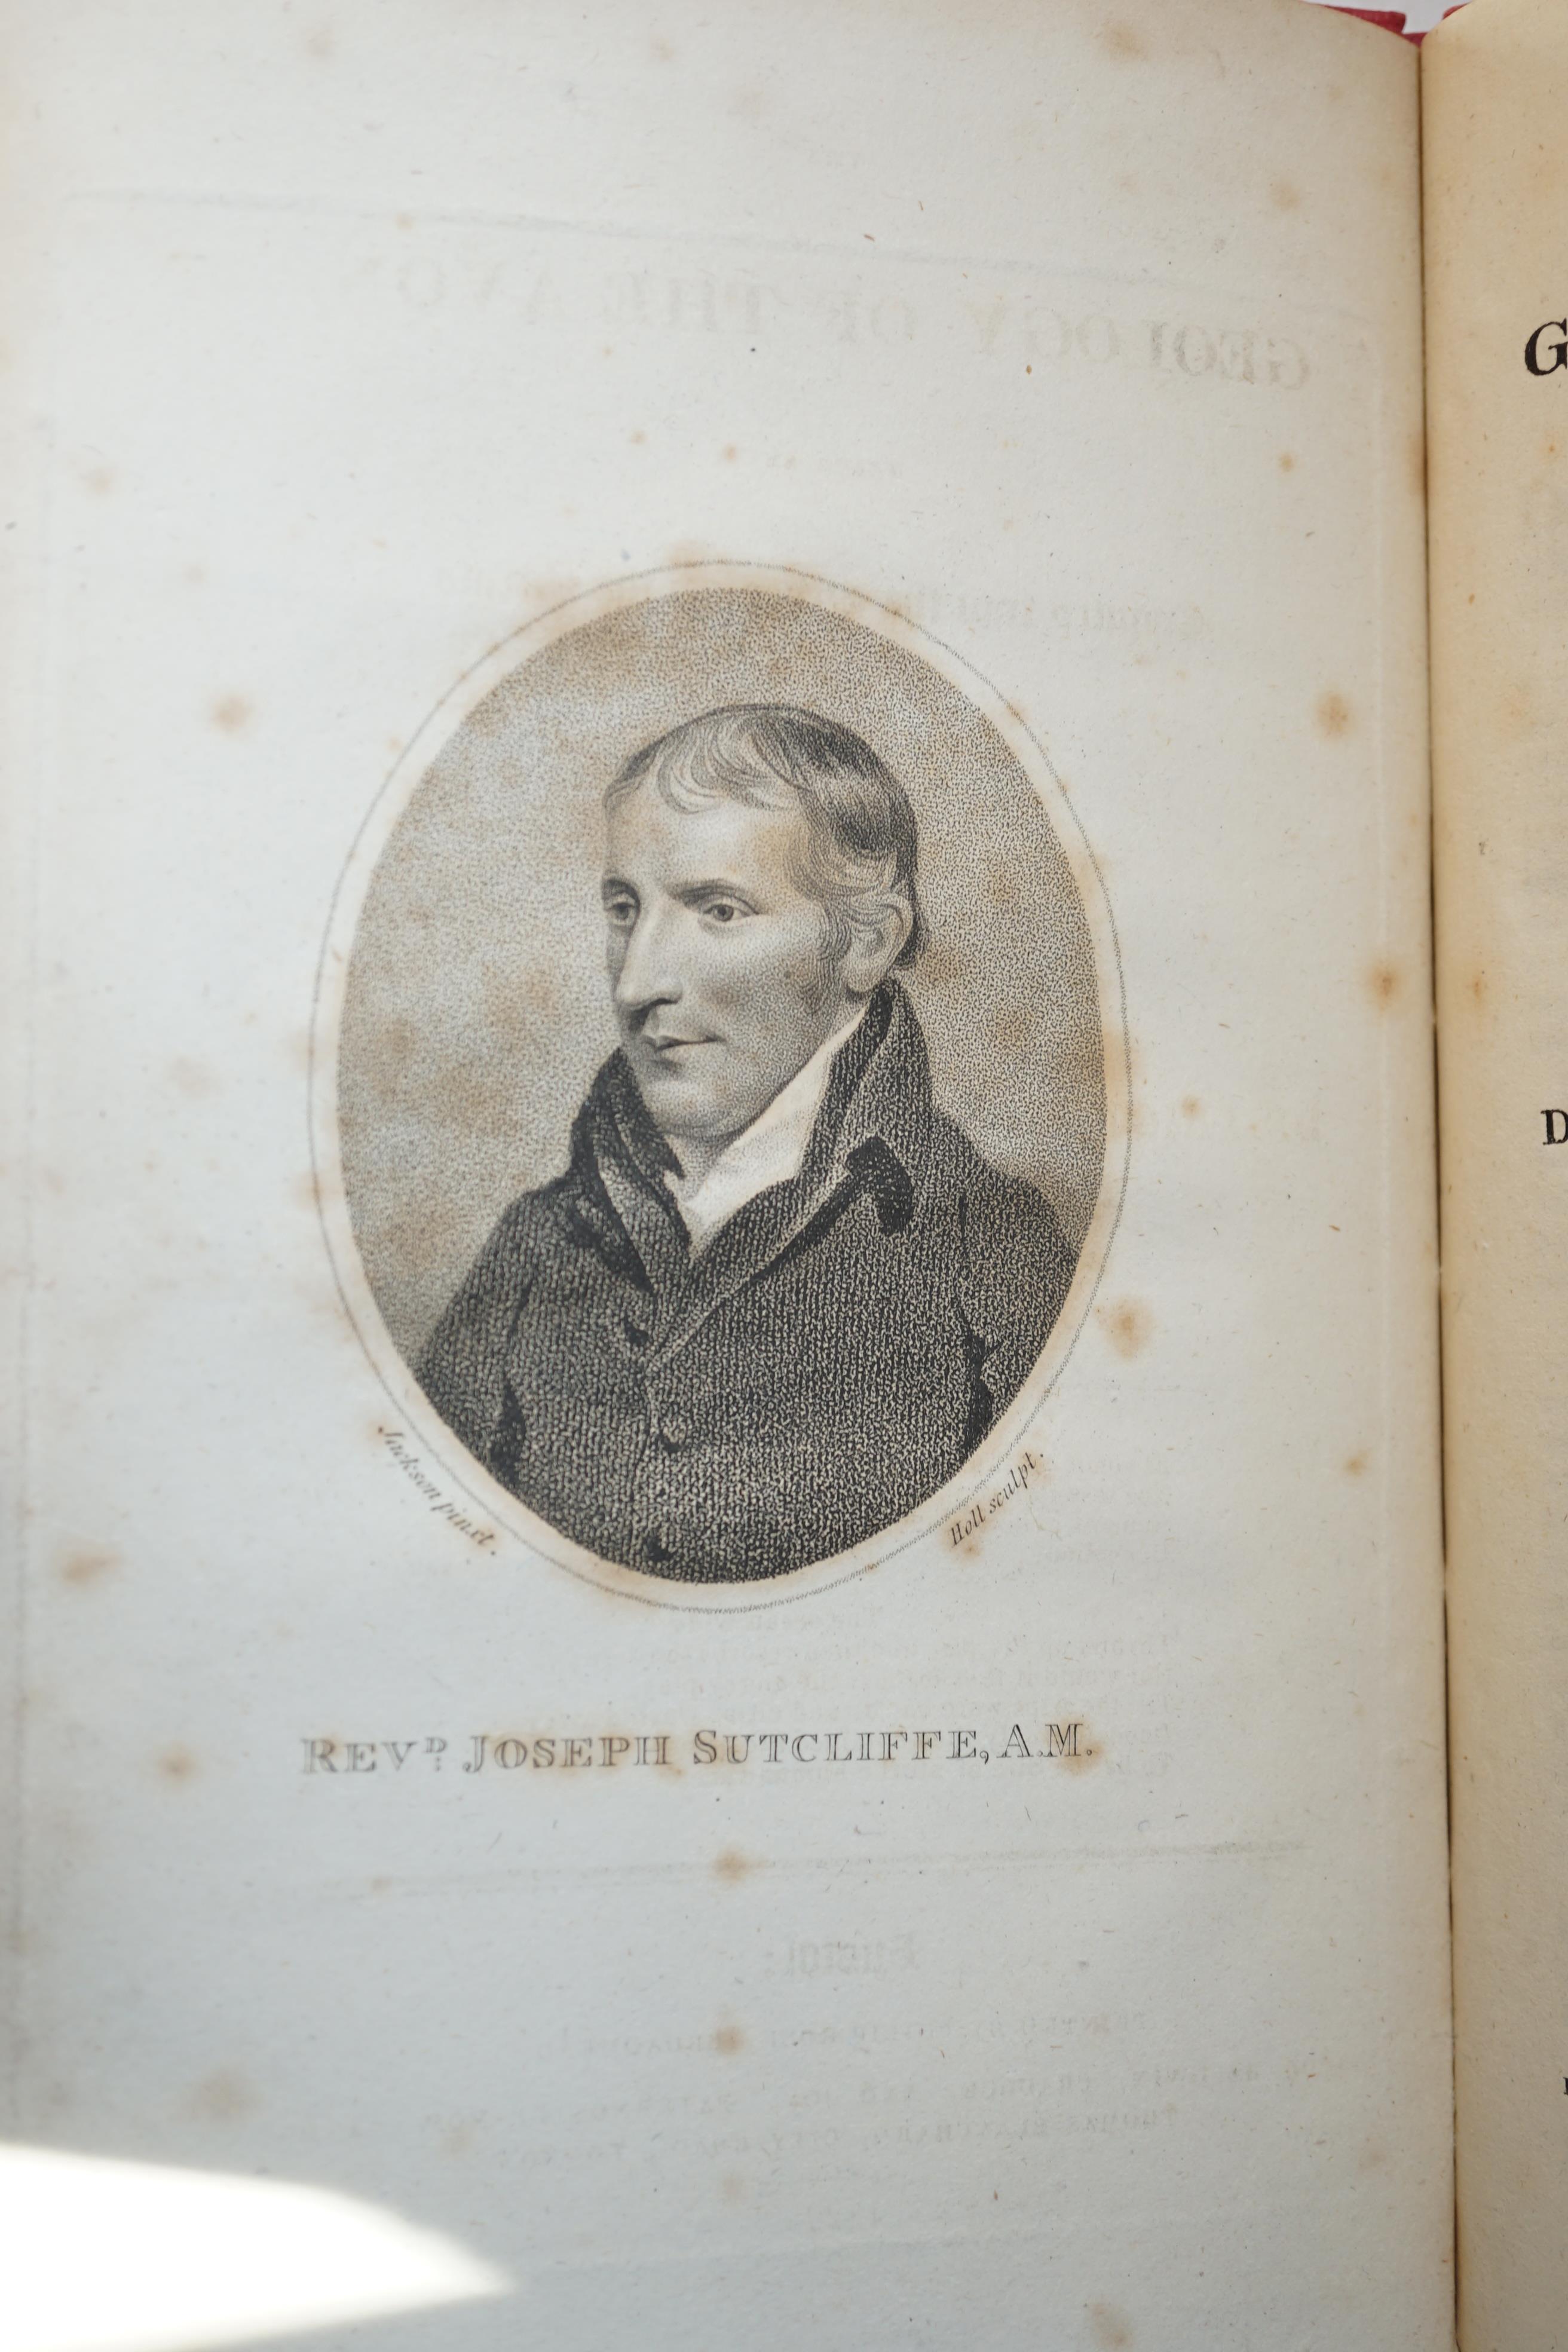 Sutcliffe, Joseph - 3 works - The Geology of the Avon, with engraved portrait frontispiece, Bristol, 1822; A Short Introduction to the Study of Geology, London, 1817 and A Refutation of Prominent Errors in the Wernerian